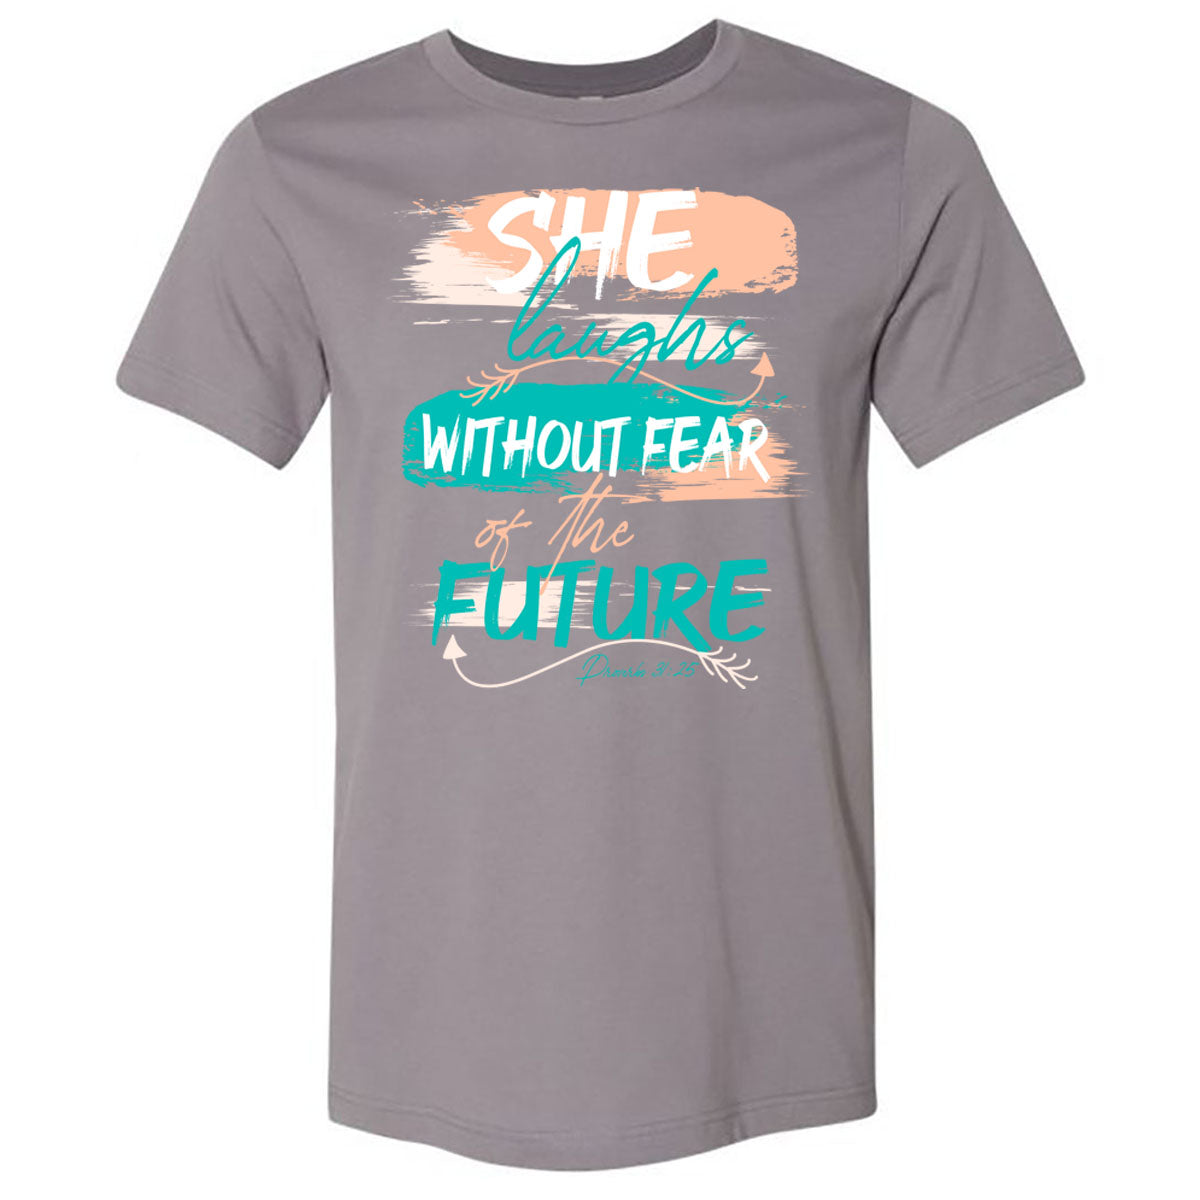 She Laughs Without Fear of the Future - Storm Short Sleeves Tee - Southern Grace Creations